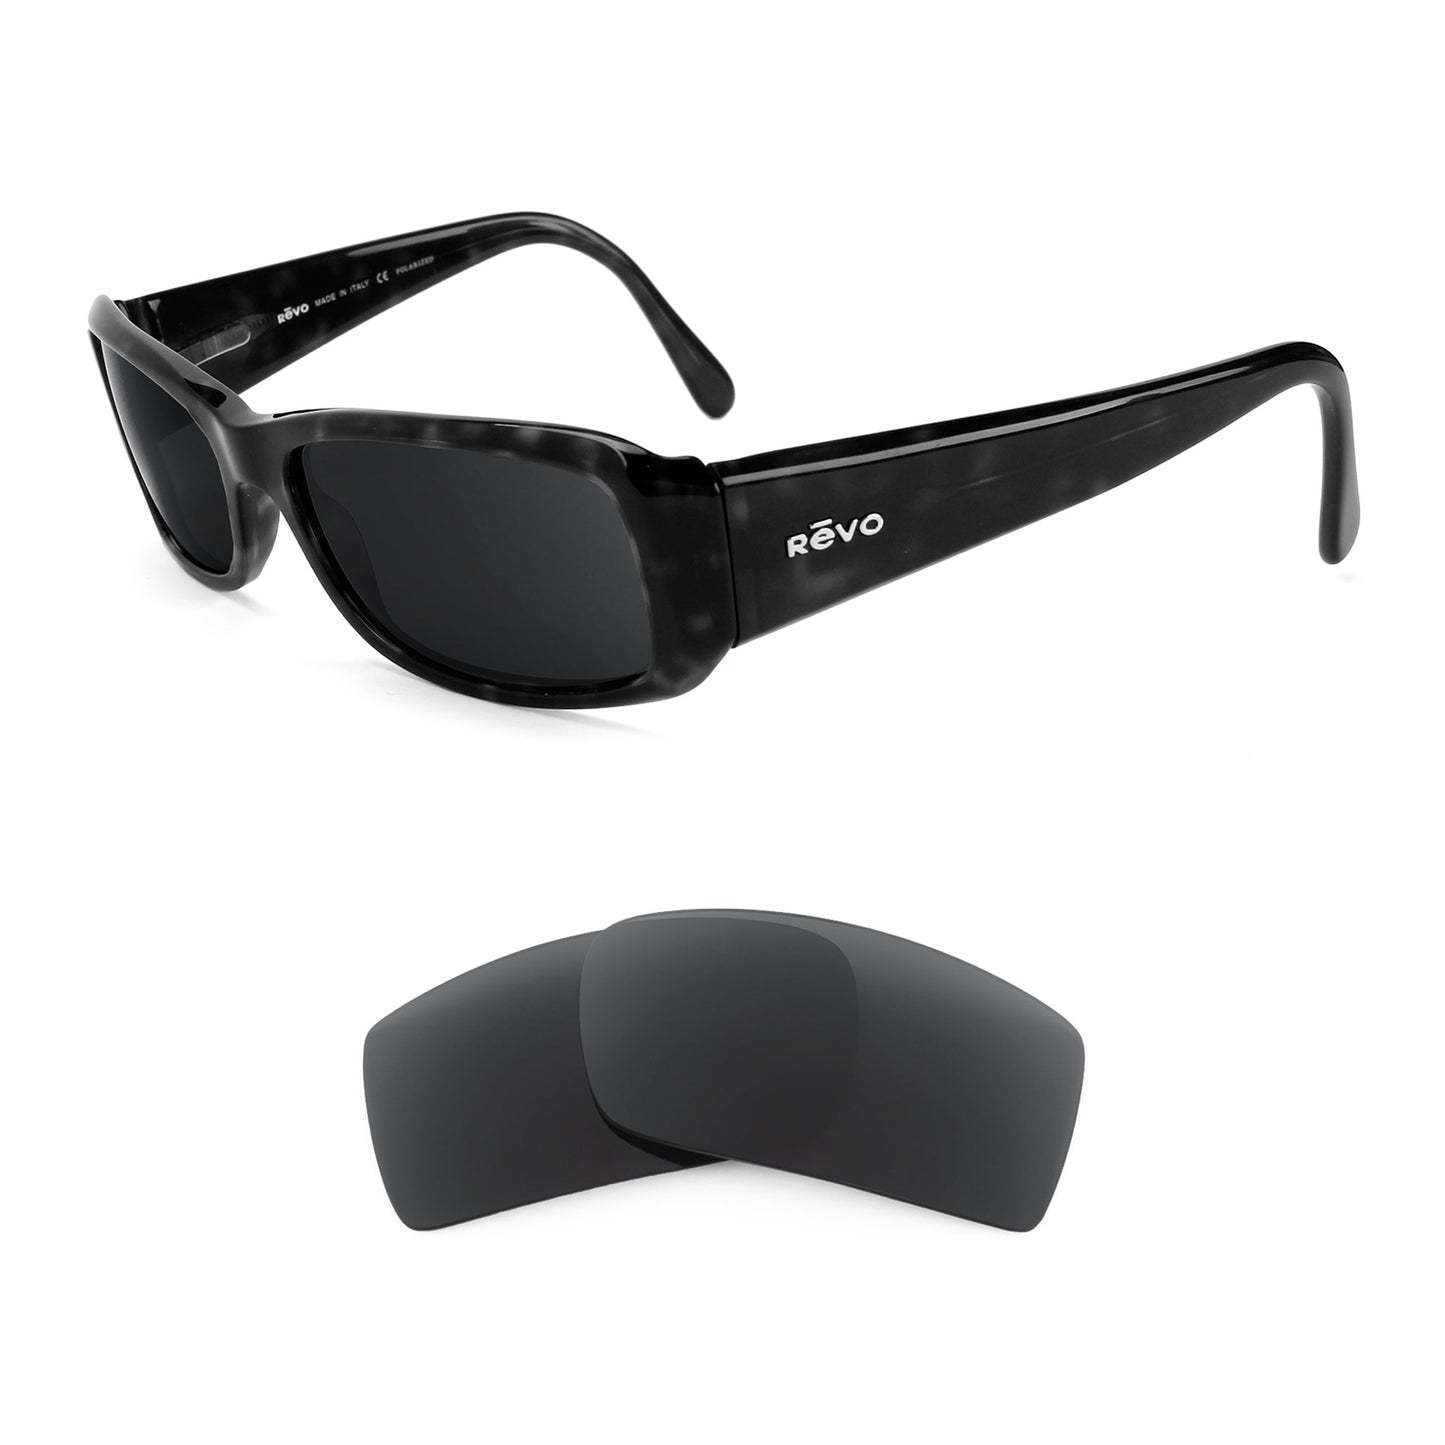 Revo 2509 sunglasses with replacement lenses